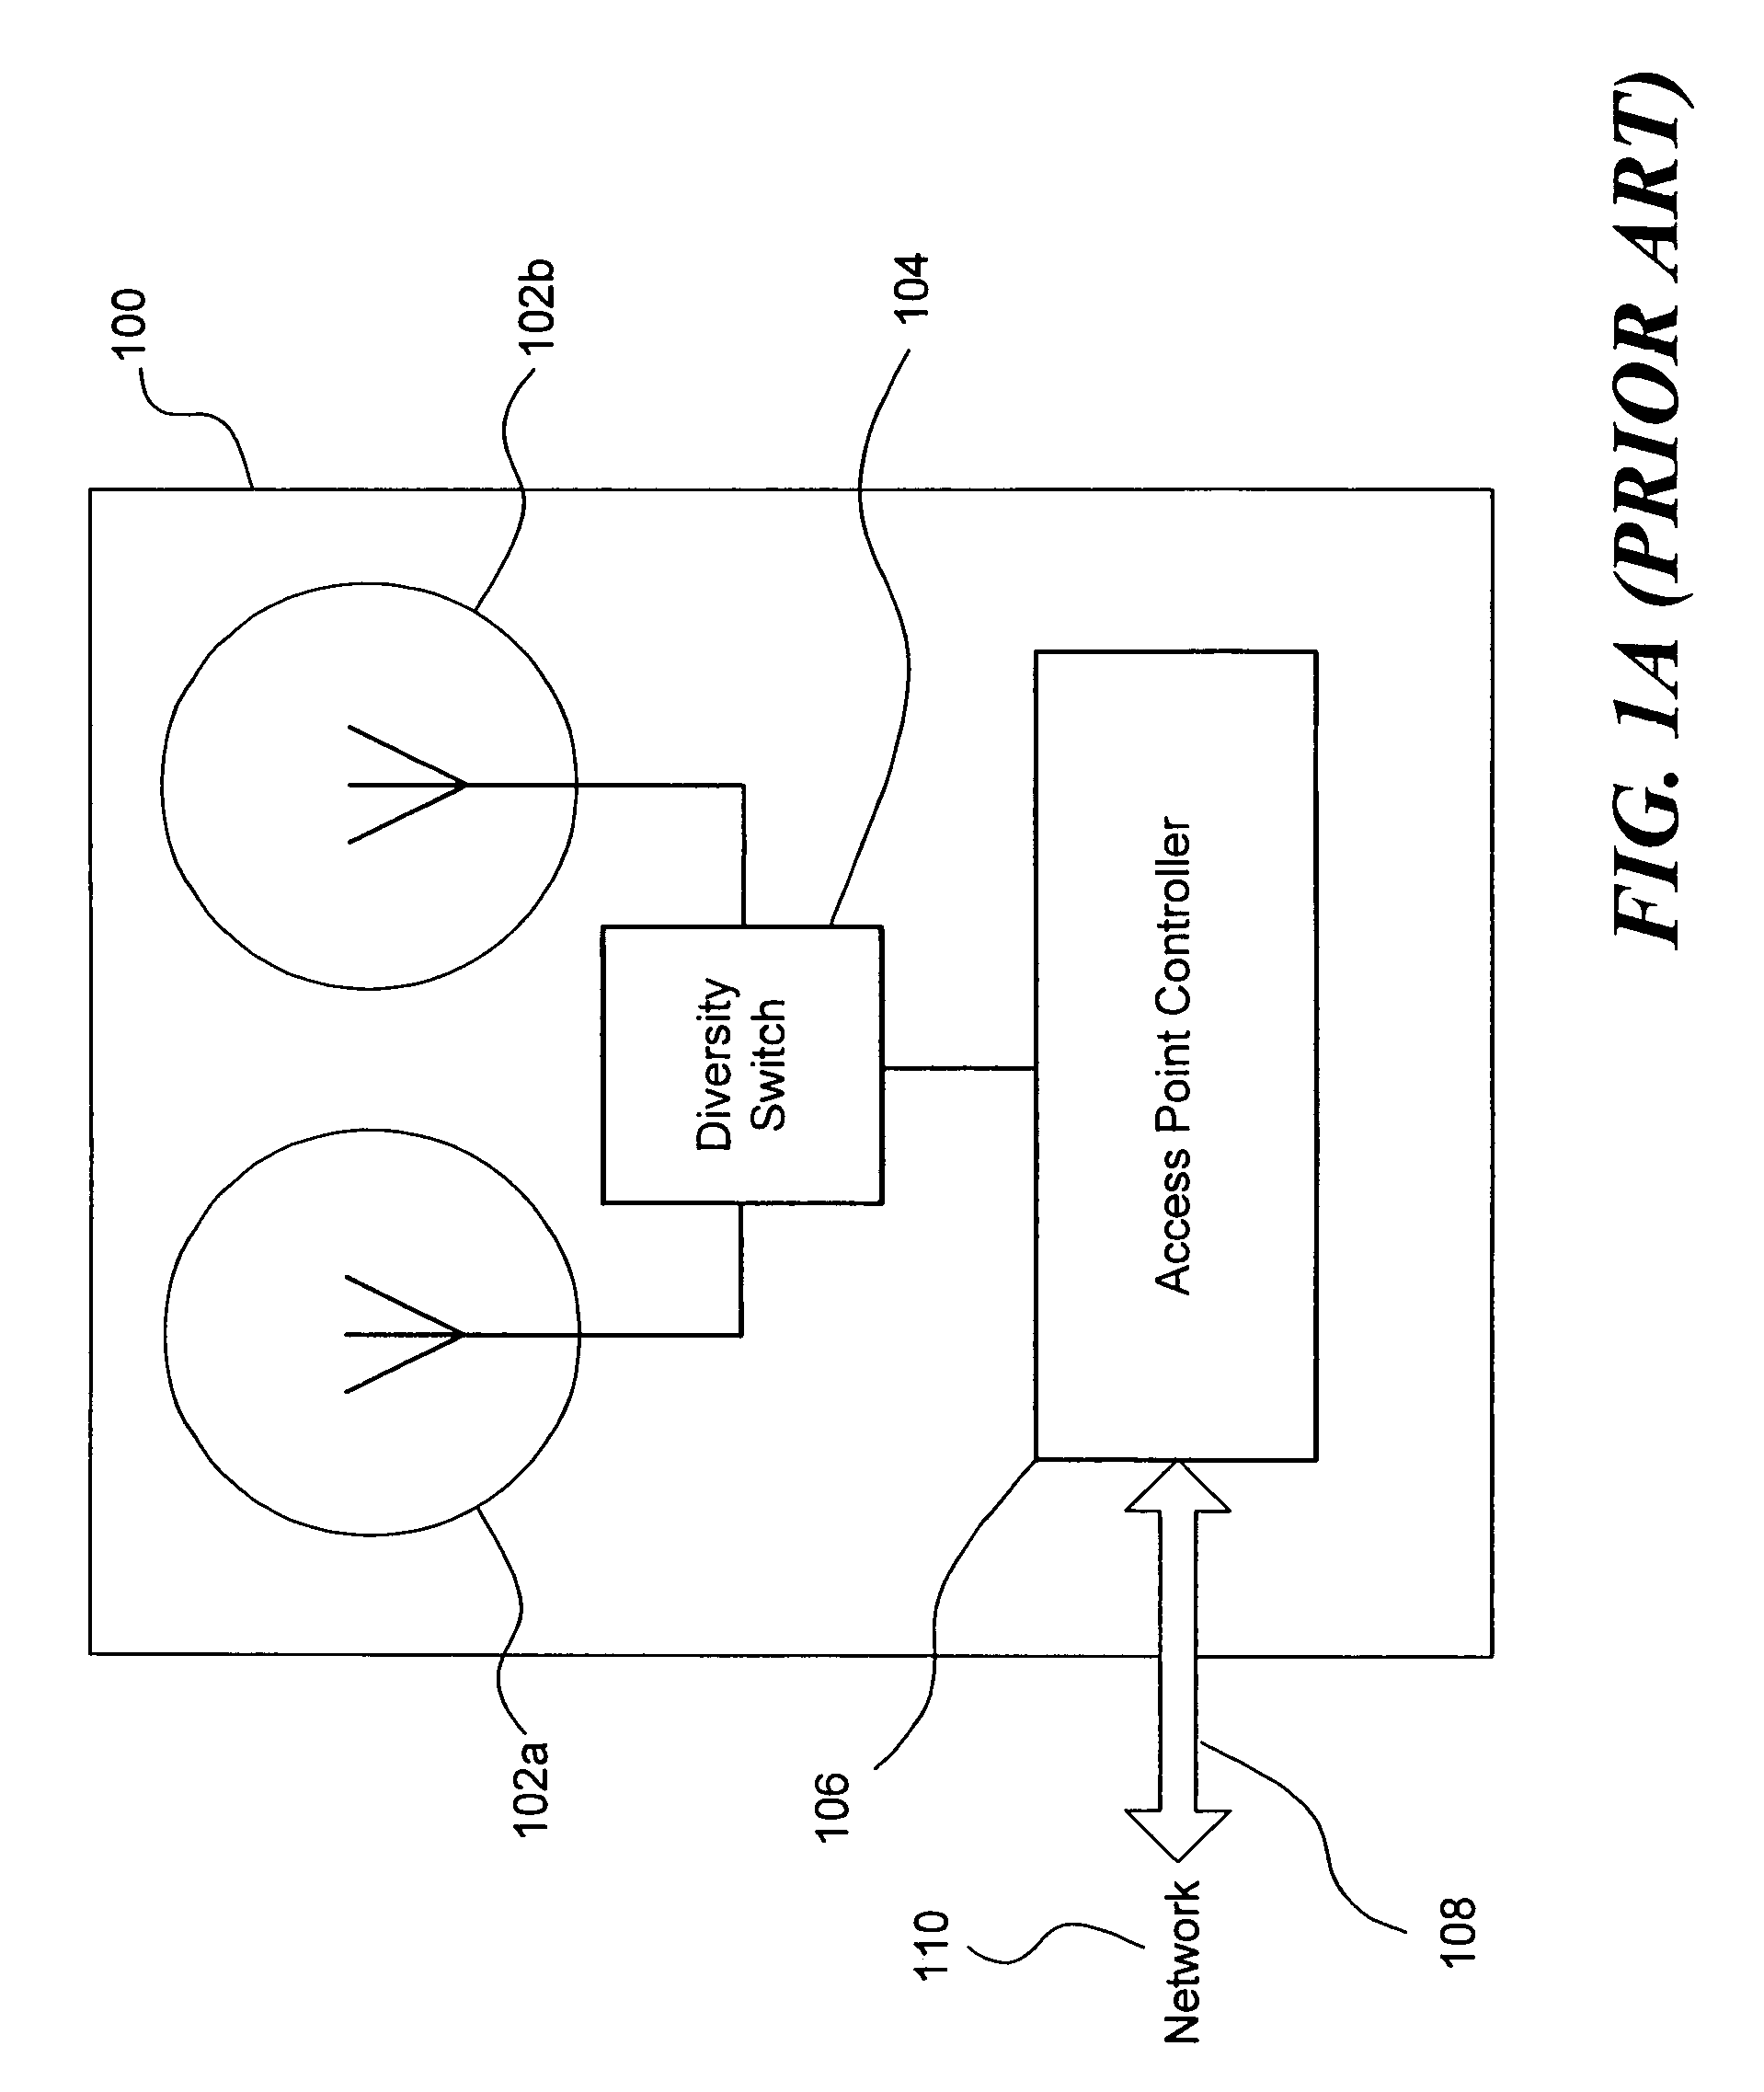 Multi-access system and method using multi-sectored antenna